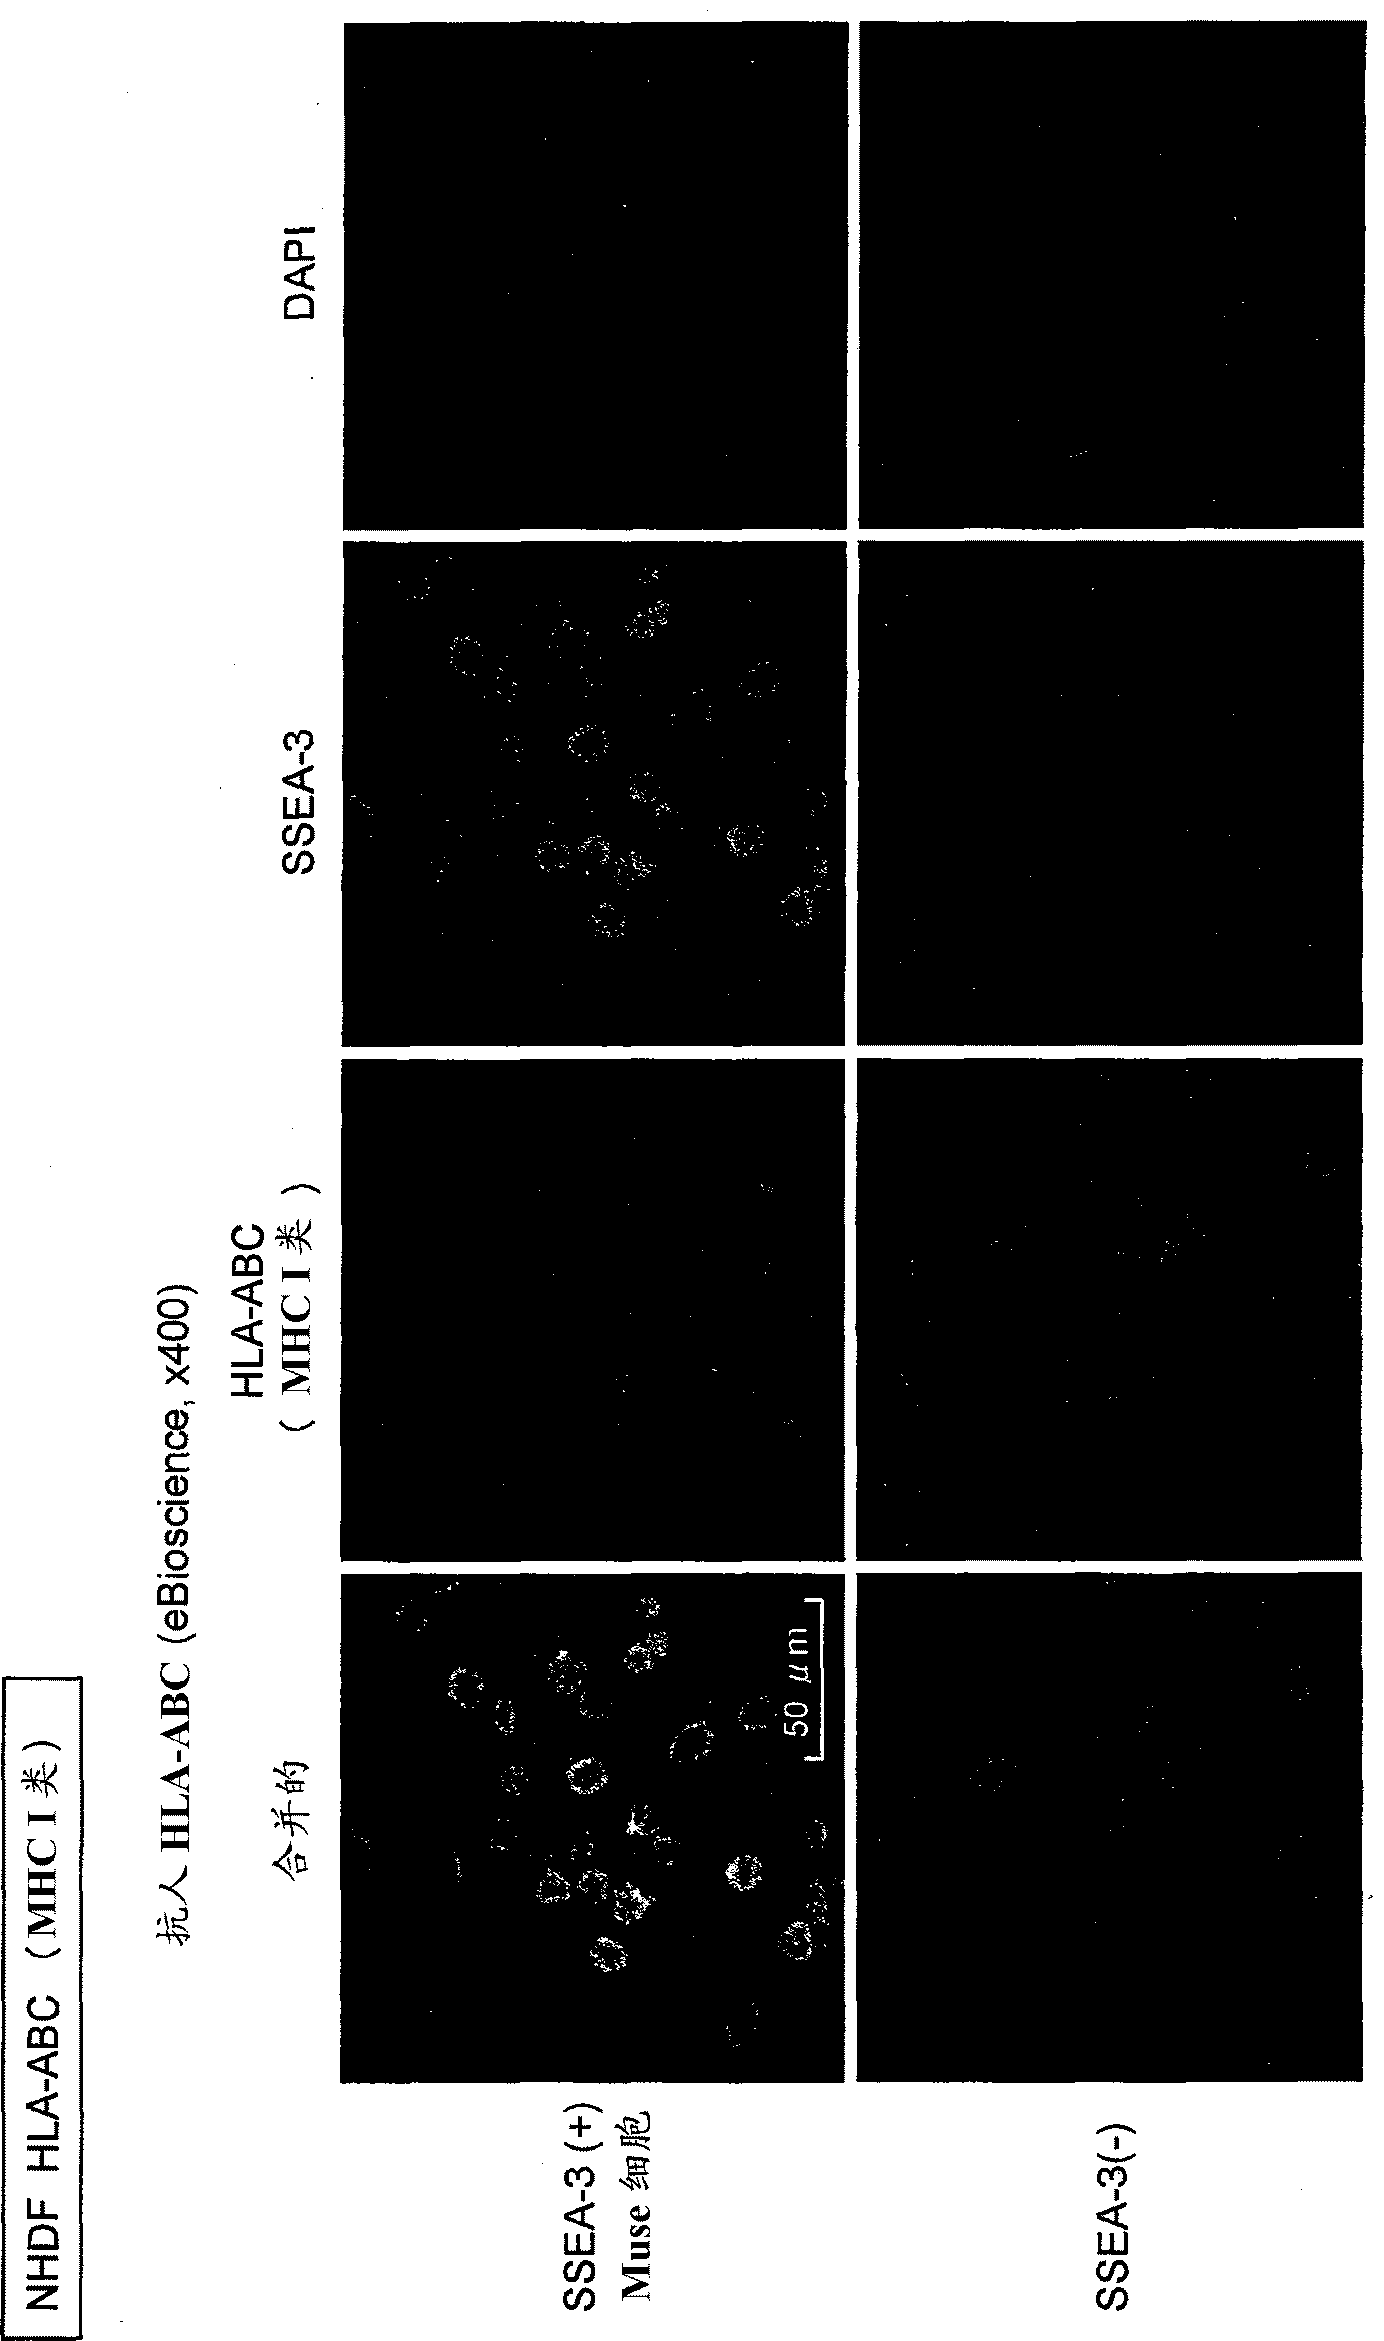 Composition for allotransplantation cell therapy, said composition containing SSEA-3 positive pluripotent stem cell capable of being isolated from body tissue